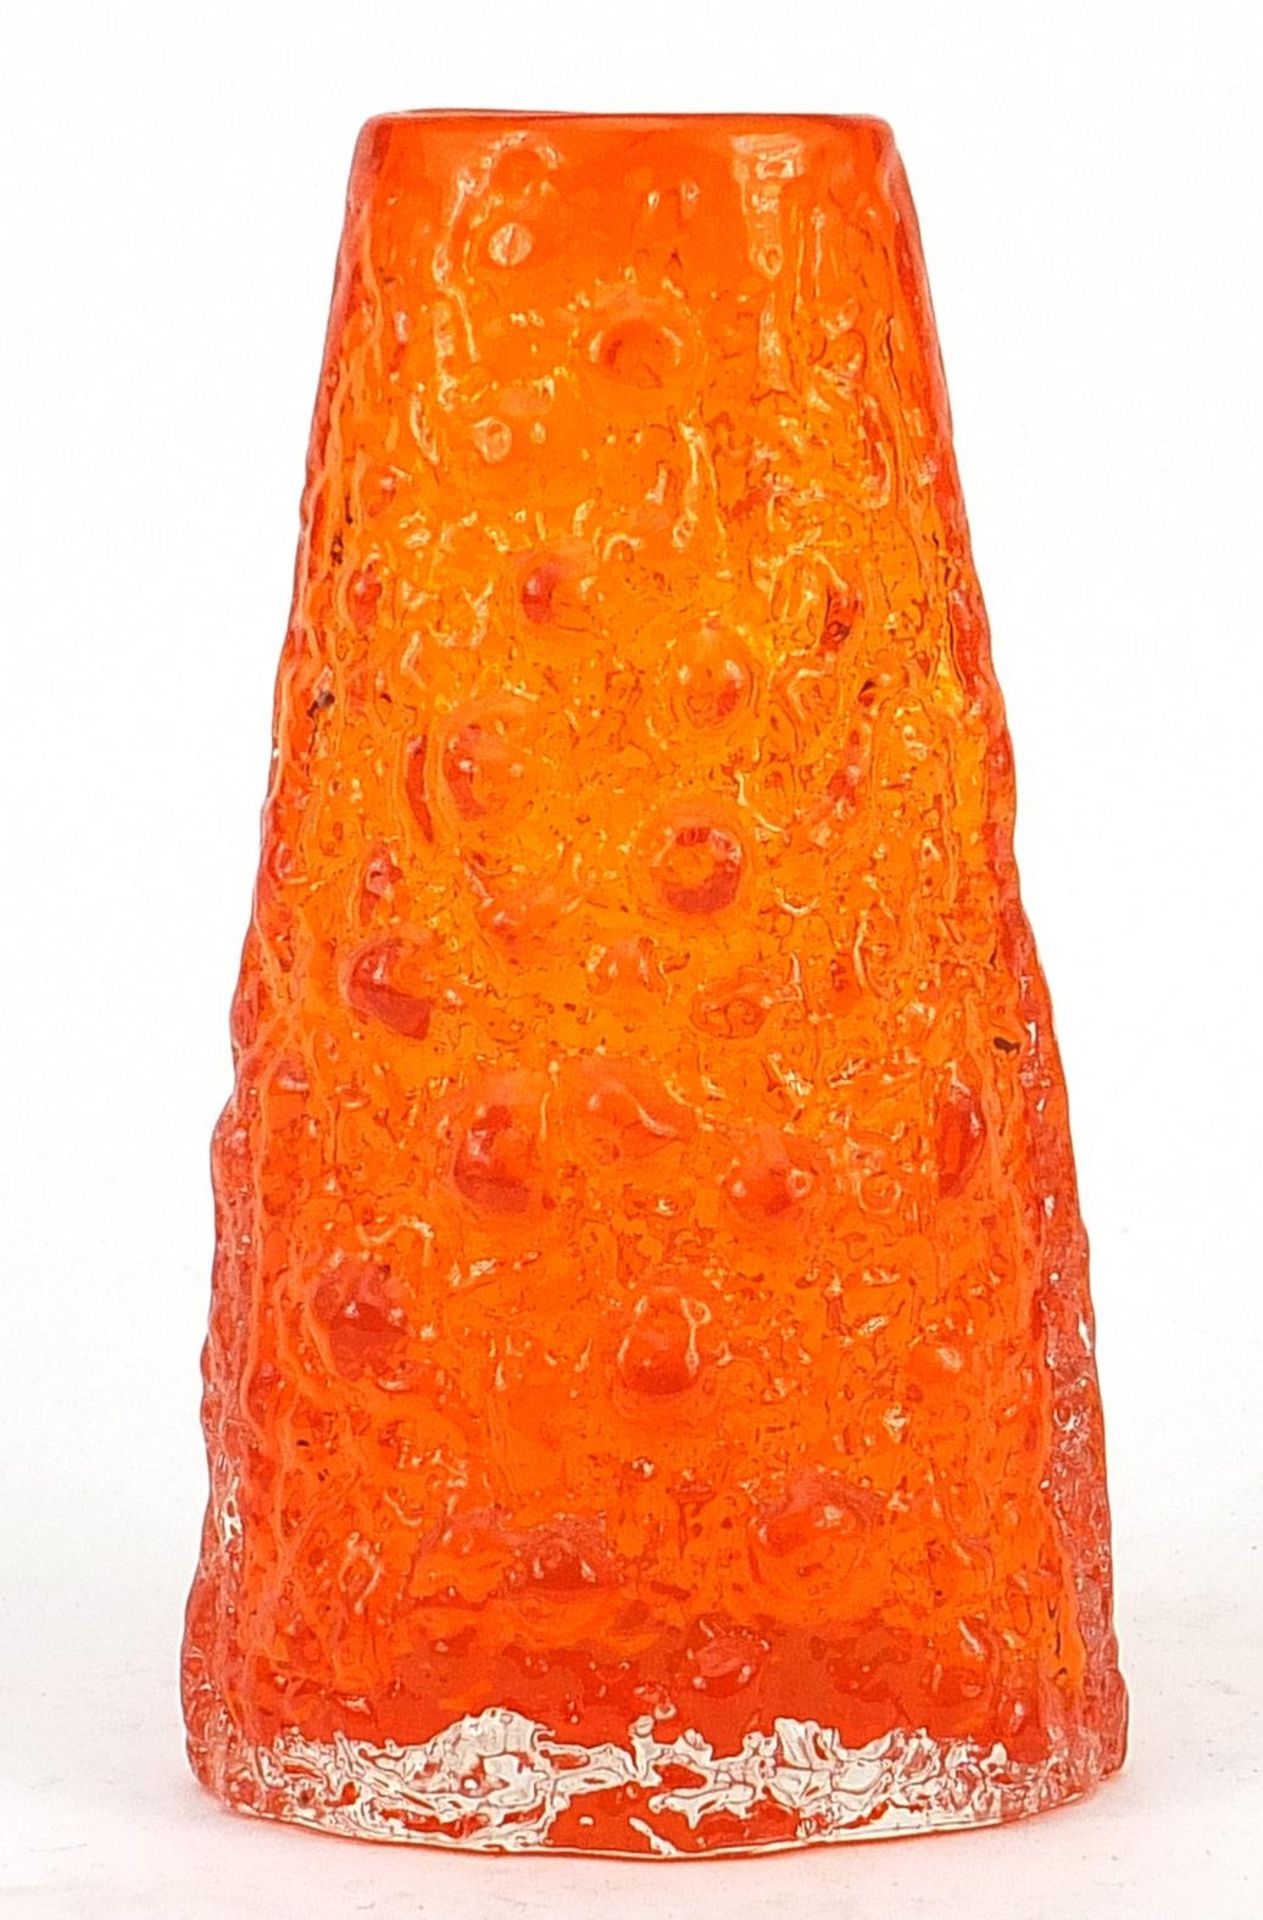 Geoffrey Baxter for Whitefriars, volcano glass vase in tangerine, 18cm high Overall in generally - Image 2 of 3